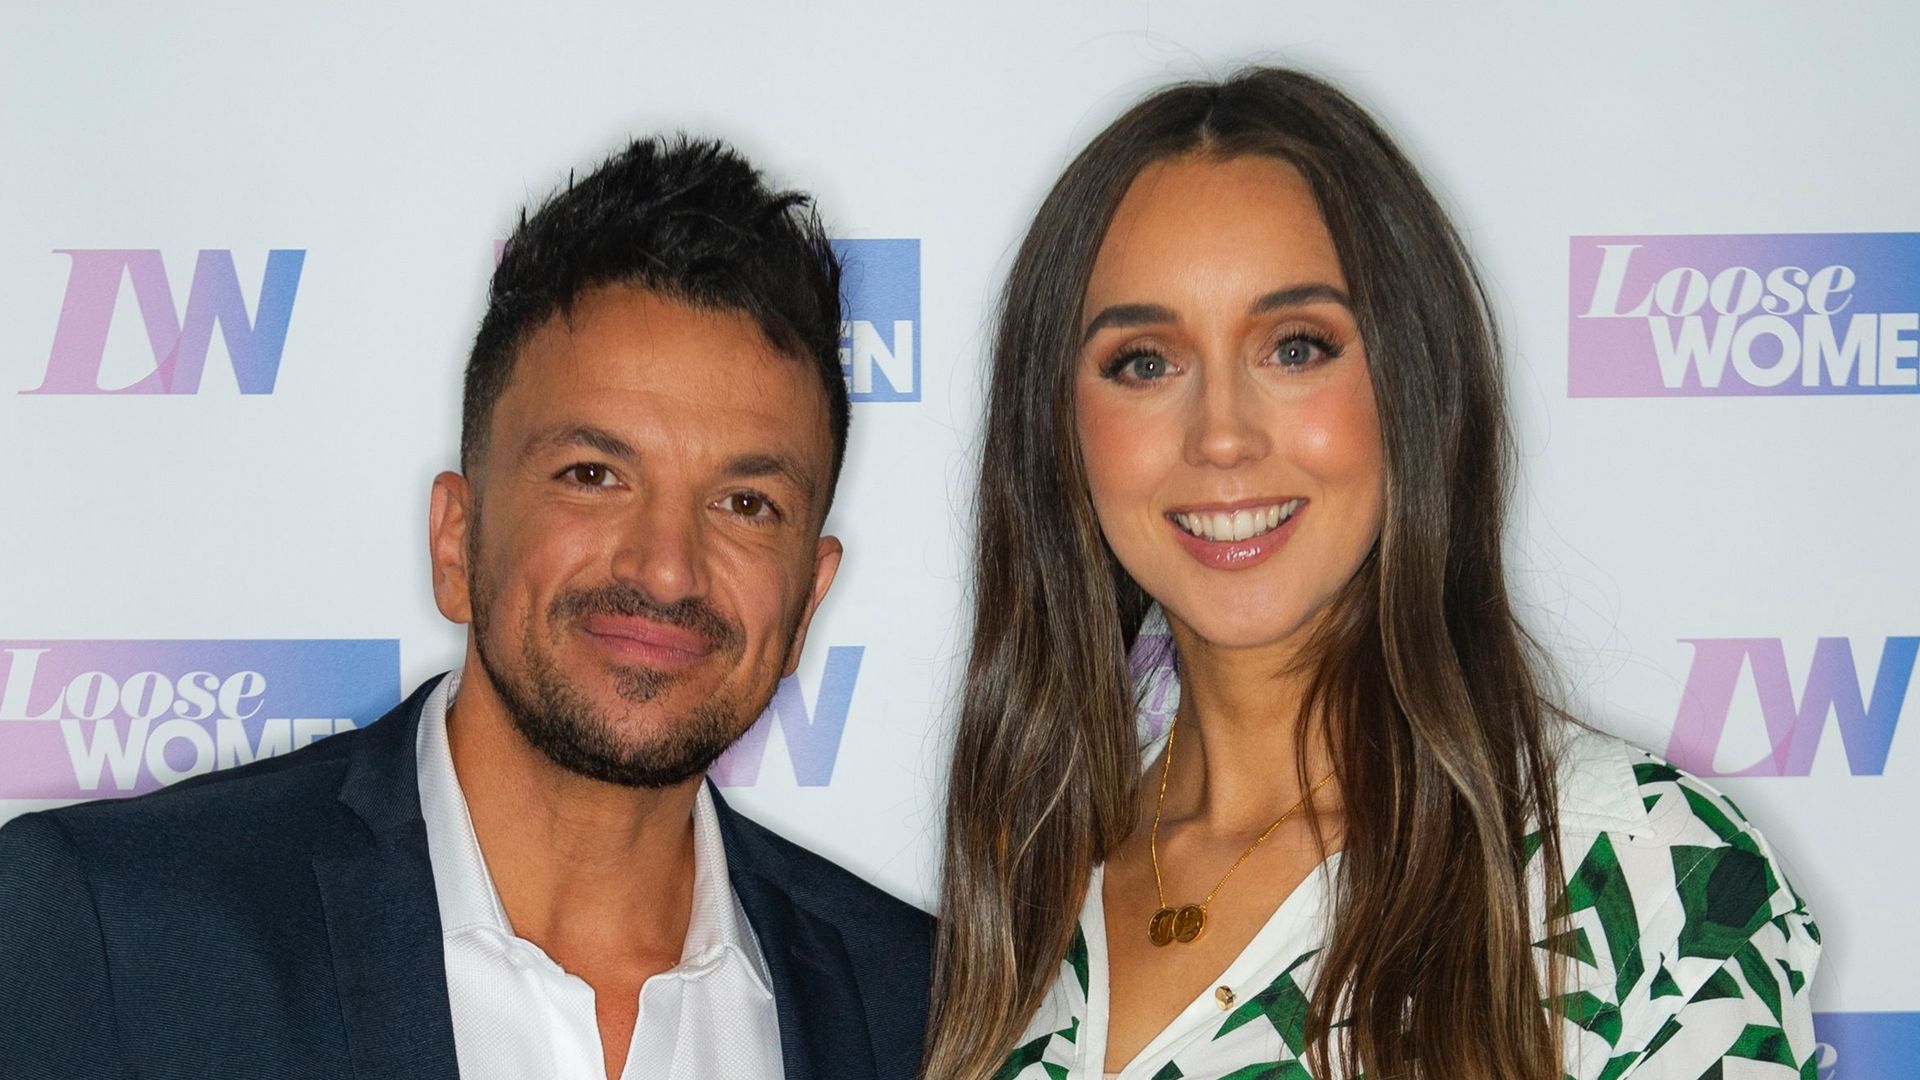 Peter Andre's wife Emily reveals cute nickname for baby Arabella after naming dilemma